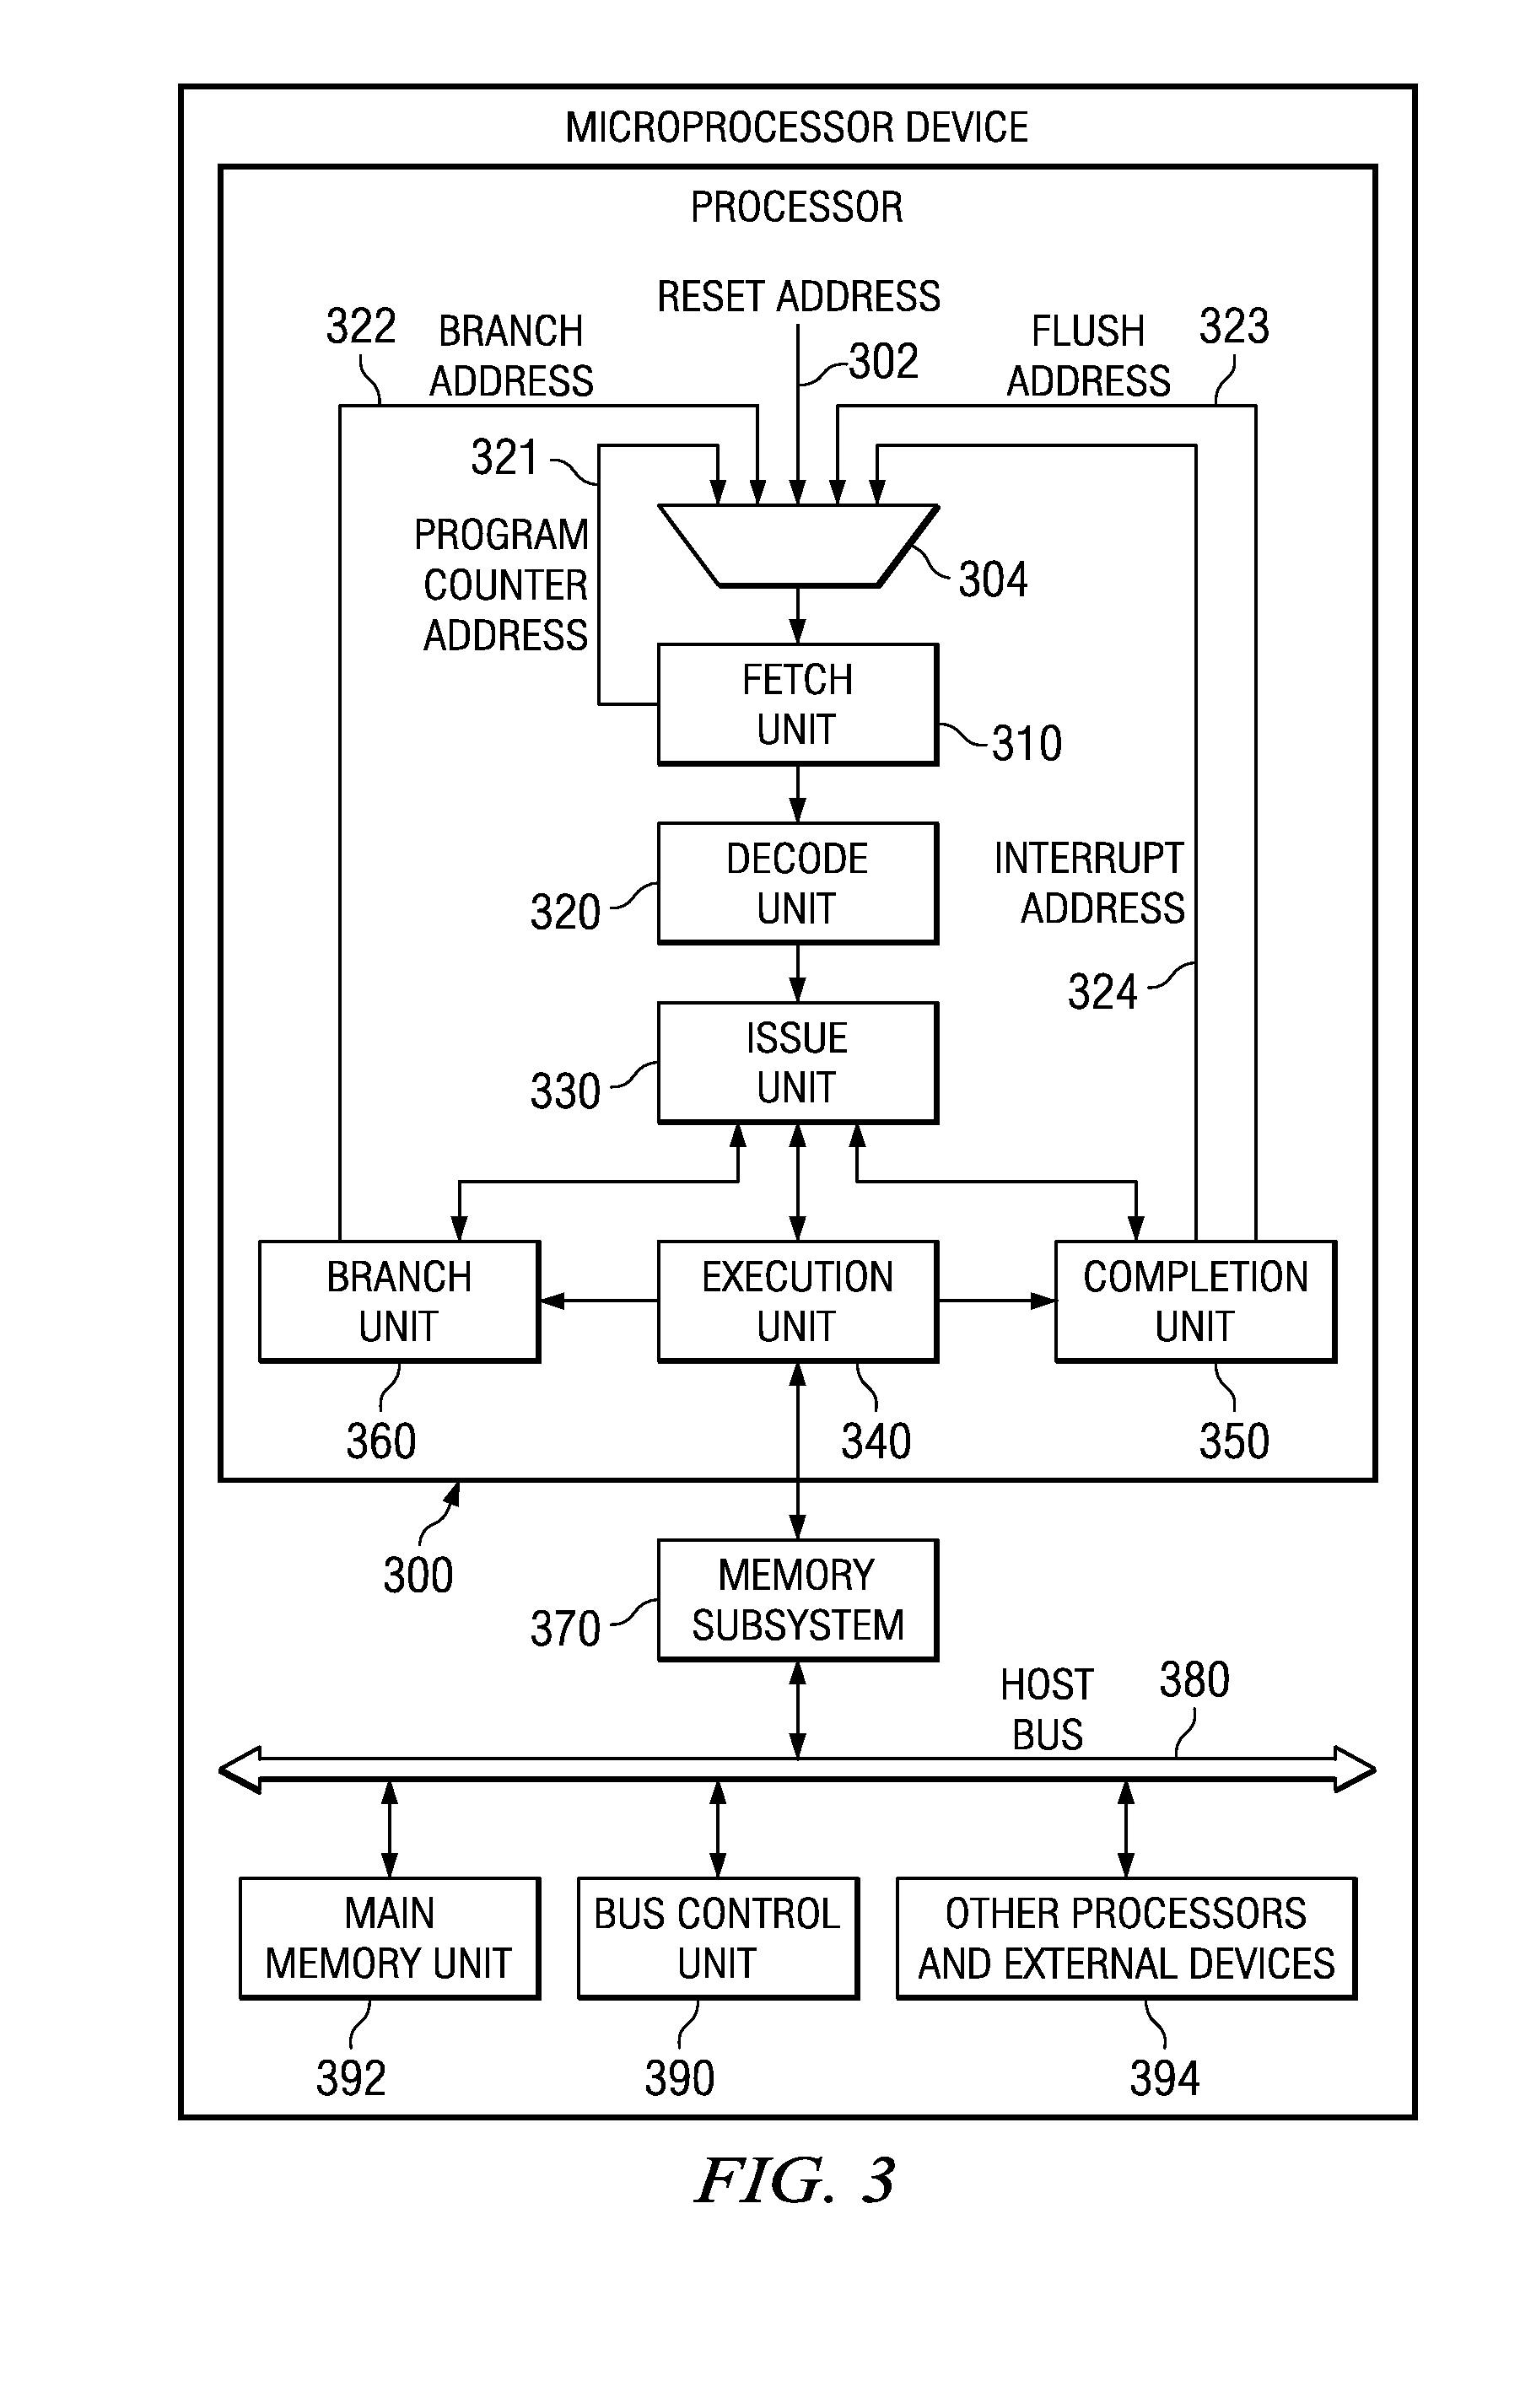 System and method for placing a processor into a gradual slow mode of operation